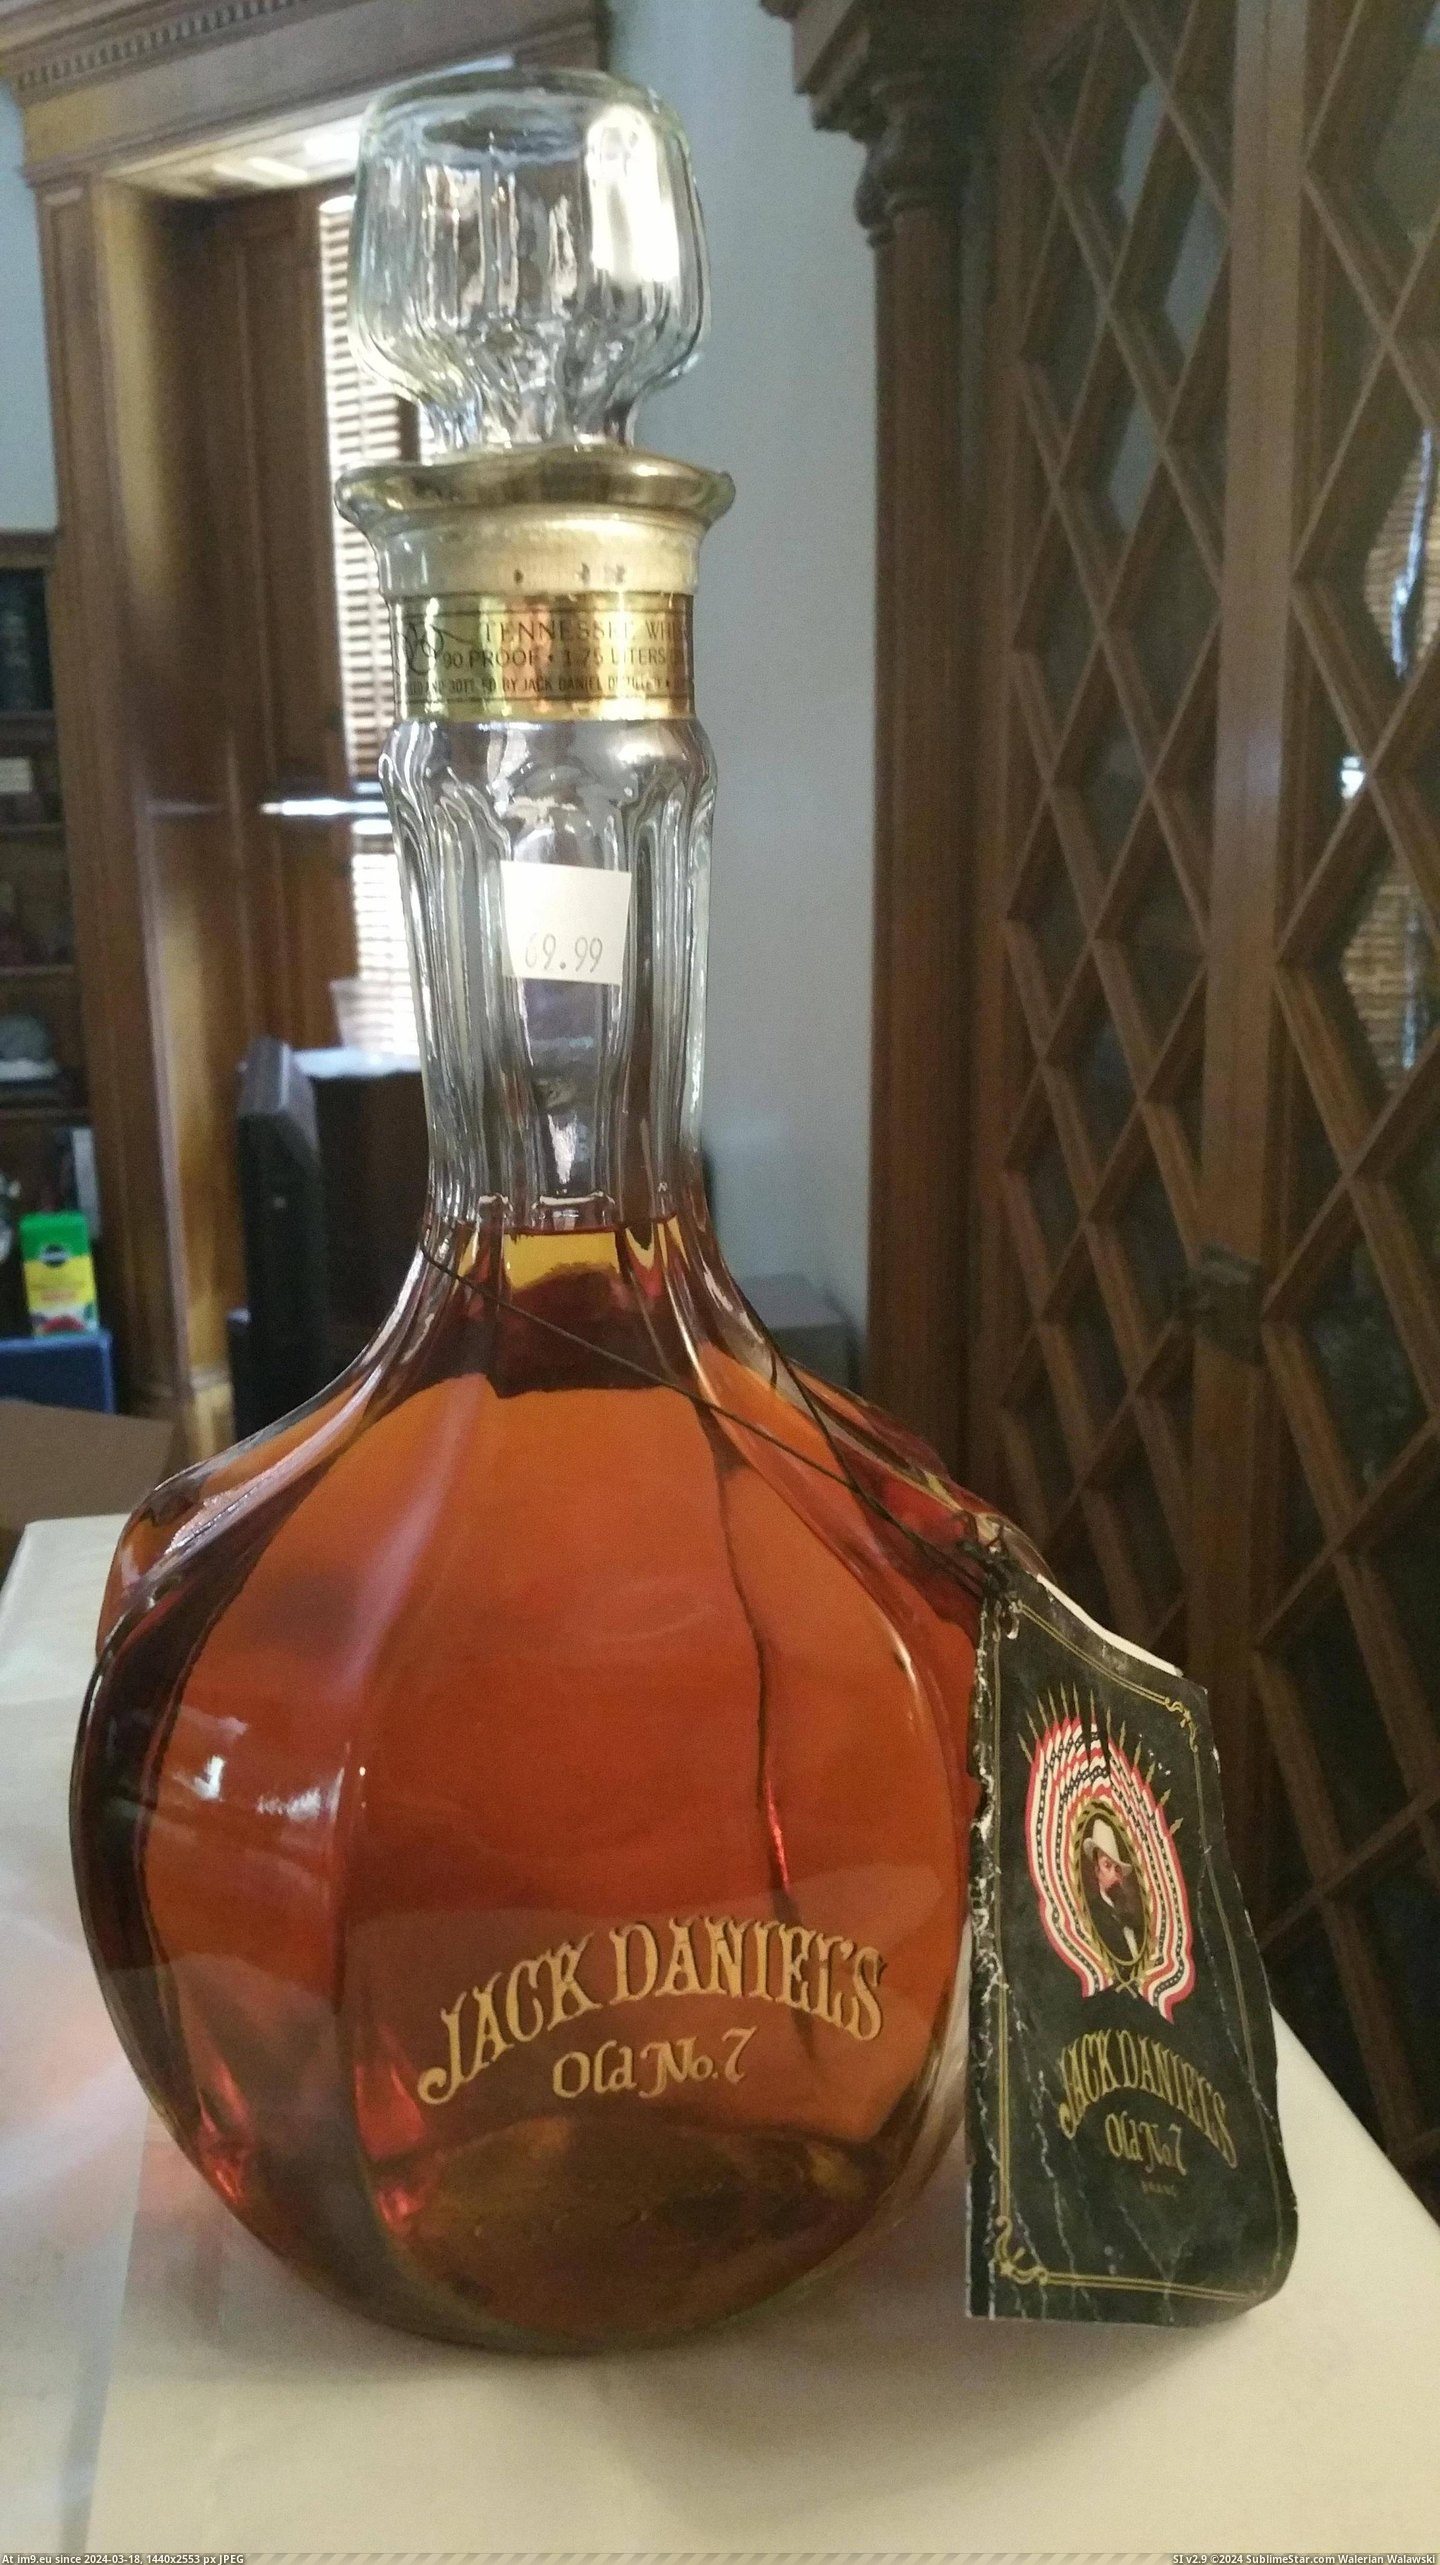 #Wife #Store #Office #Owner #Liquor #Passed #Stuck #Price [Pics] So the liquor store owner passed, his wife found this stashed back in the office, put a price on it($69.99), and stuck it Pic. (Image of album My r/PICS favs))